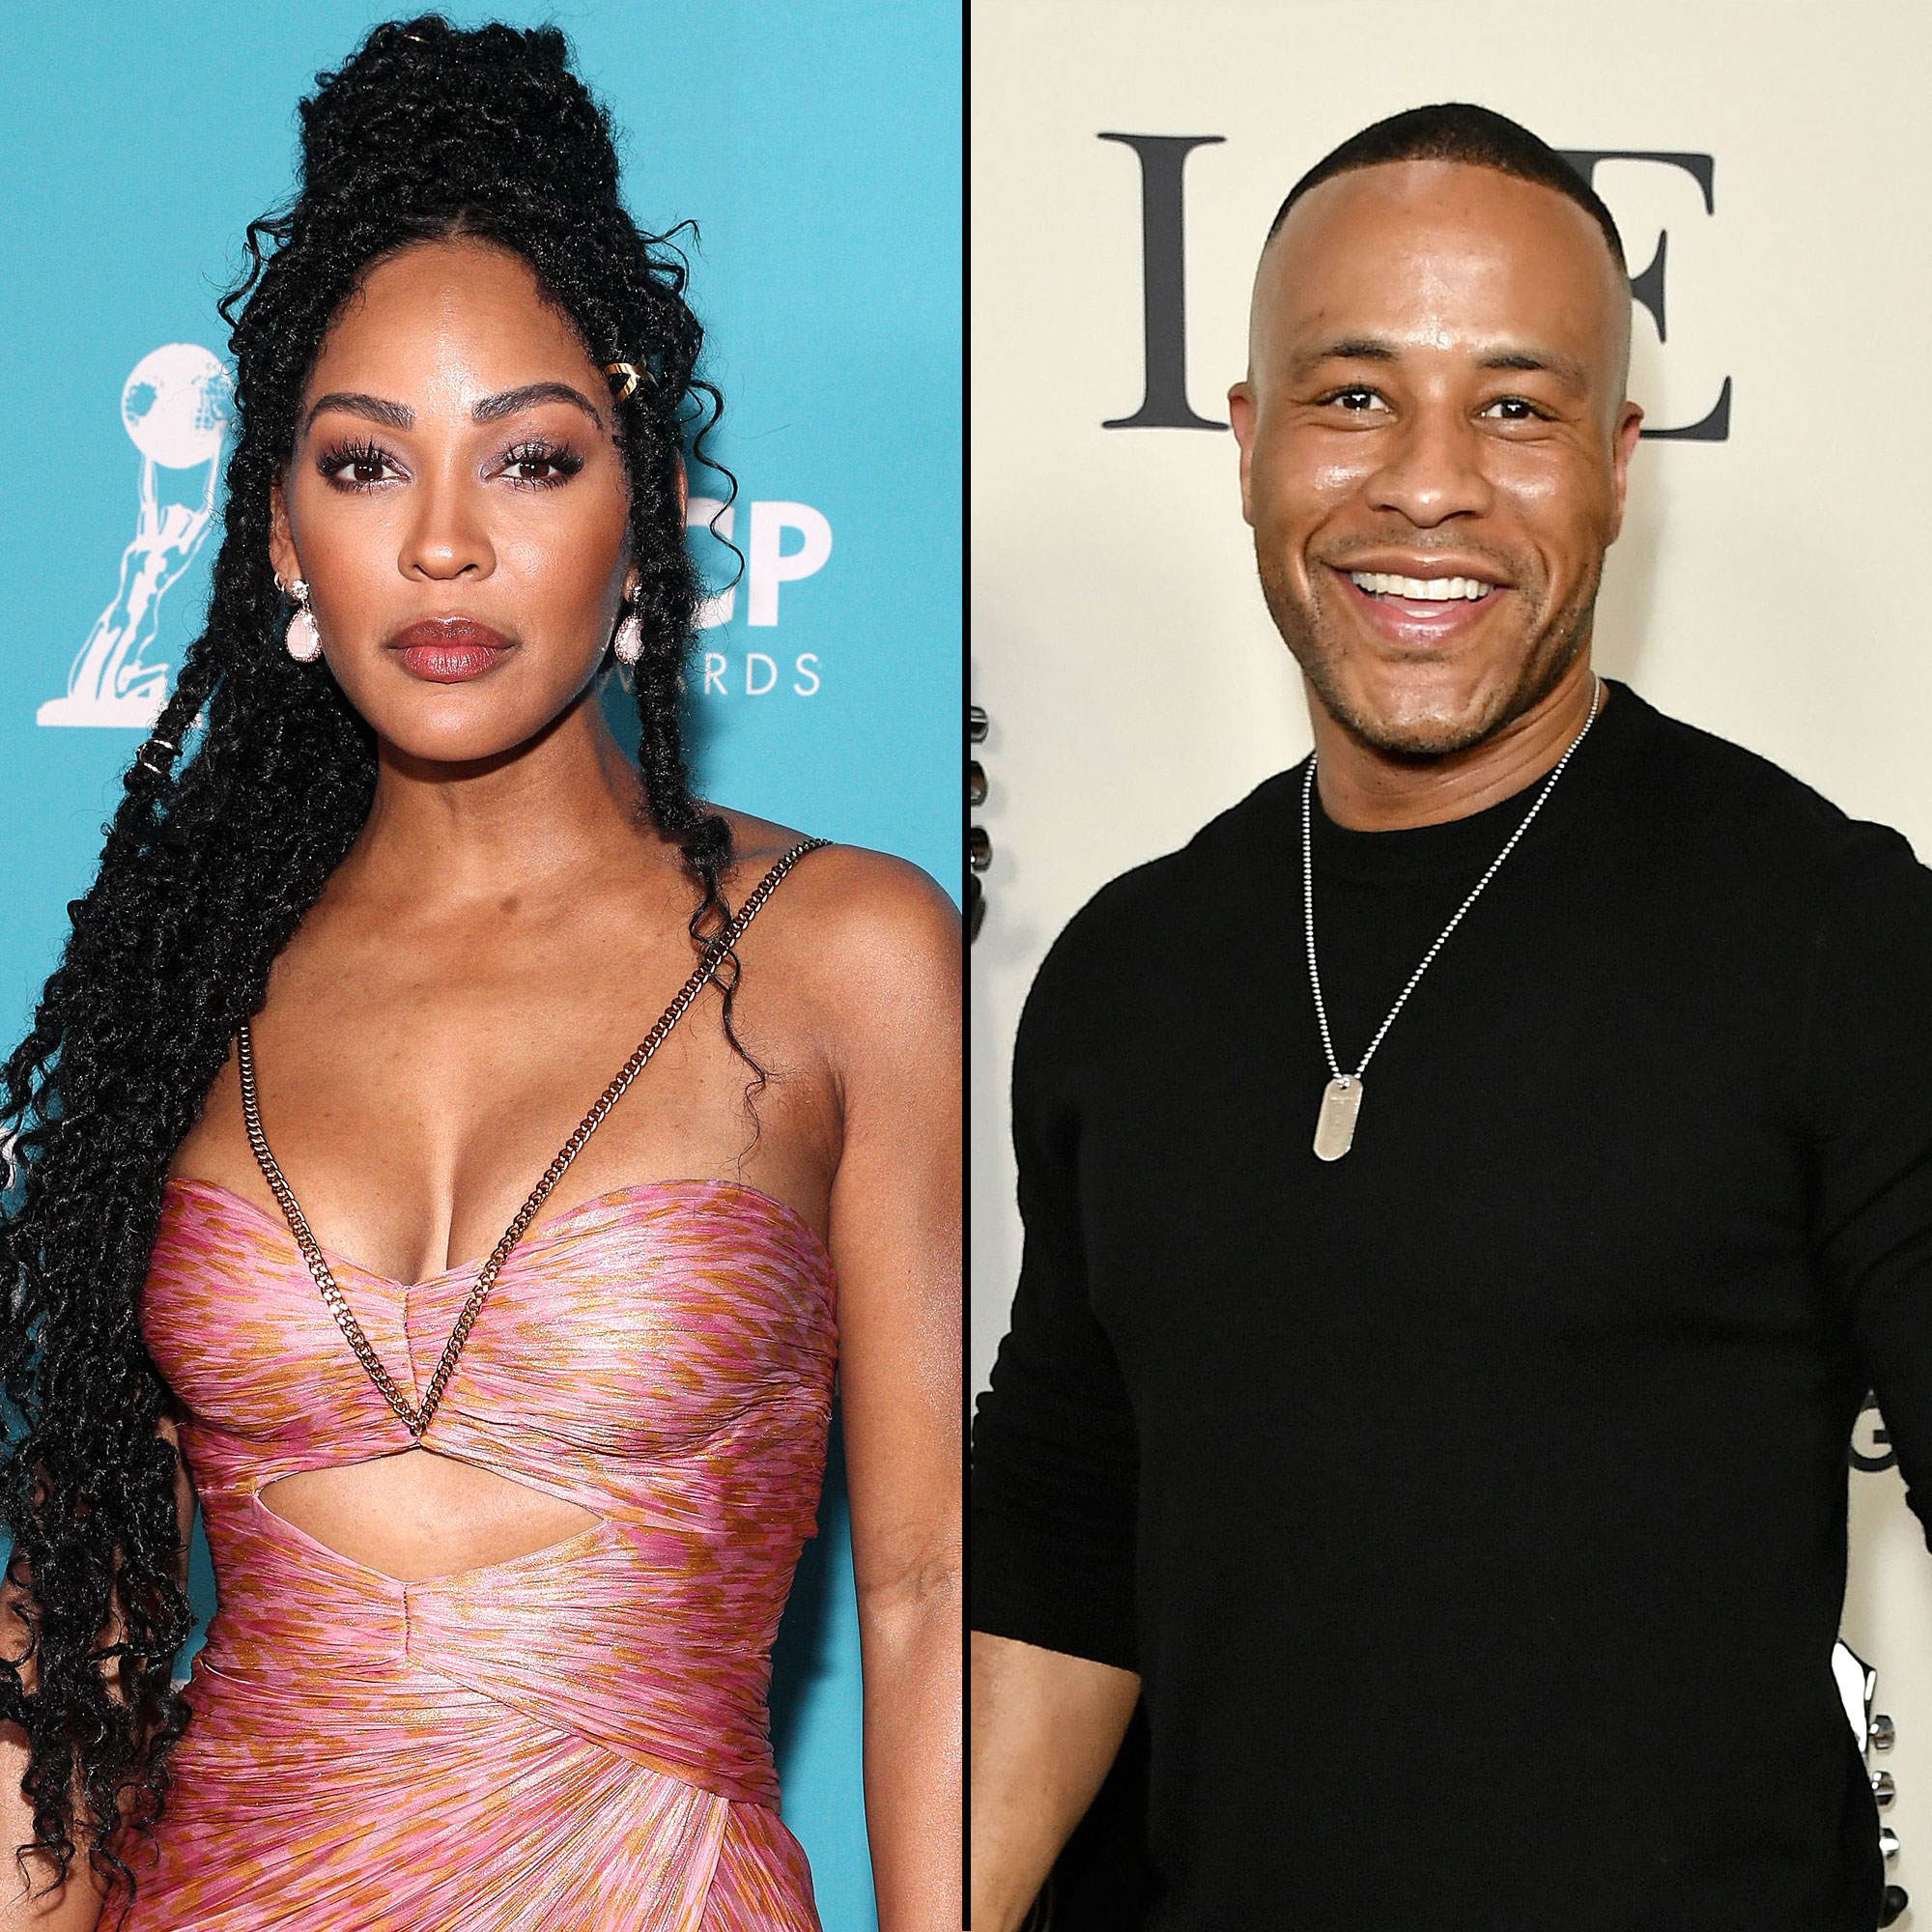 Meagan Good Divorce Finalized Ahead of Ex-Husbands MAFS Debut image pic